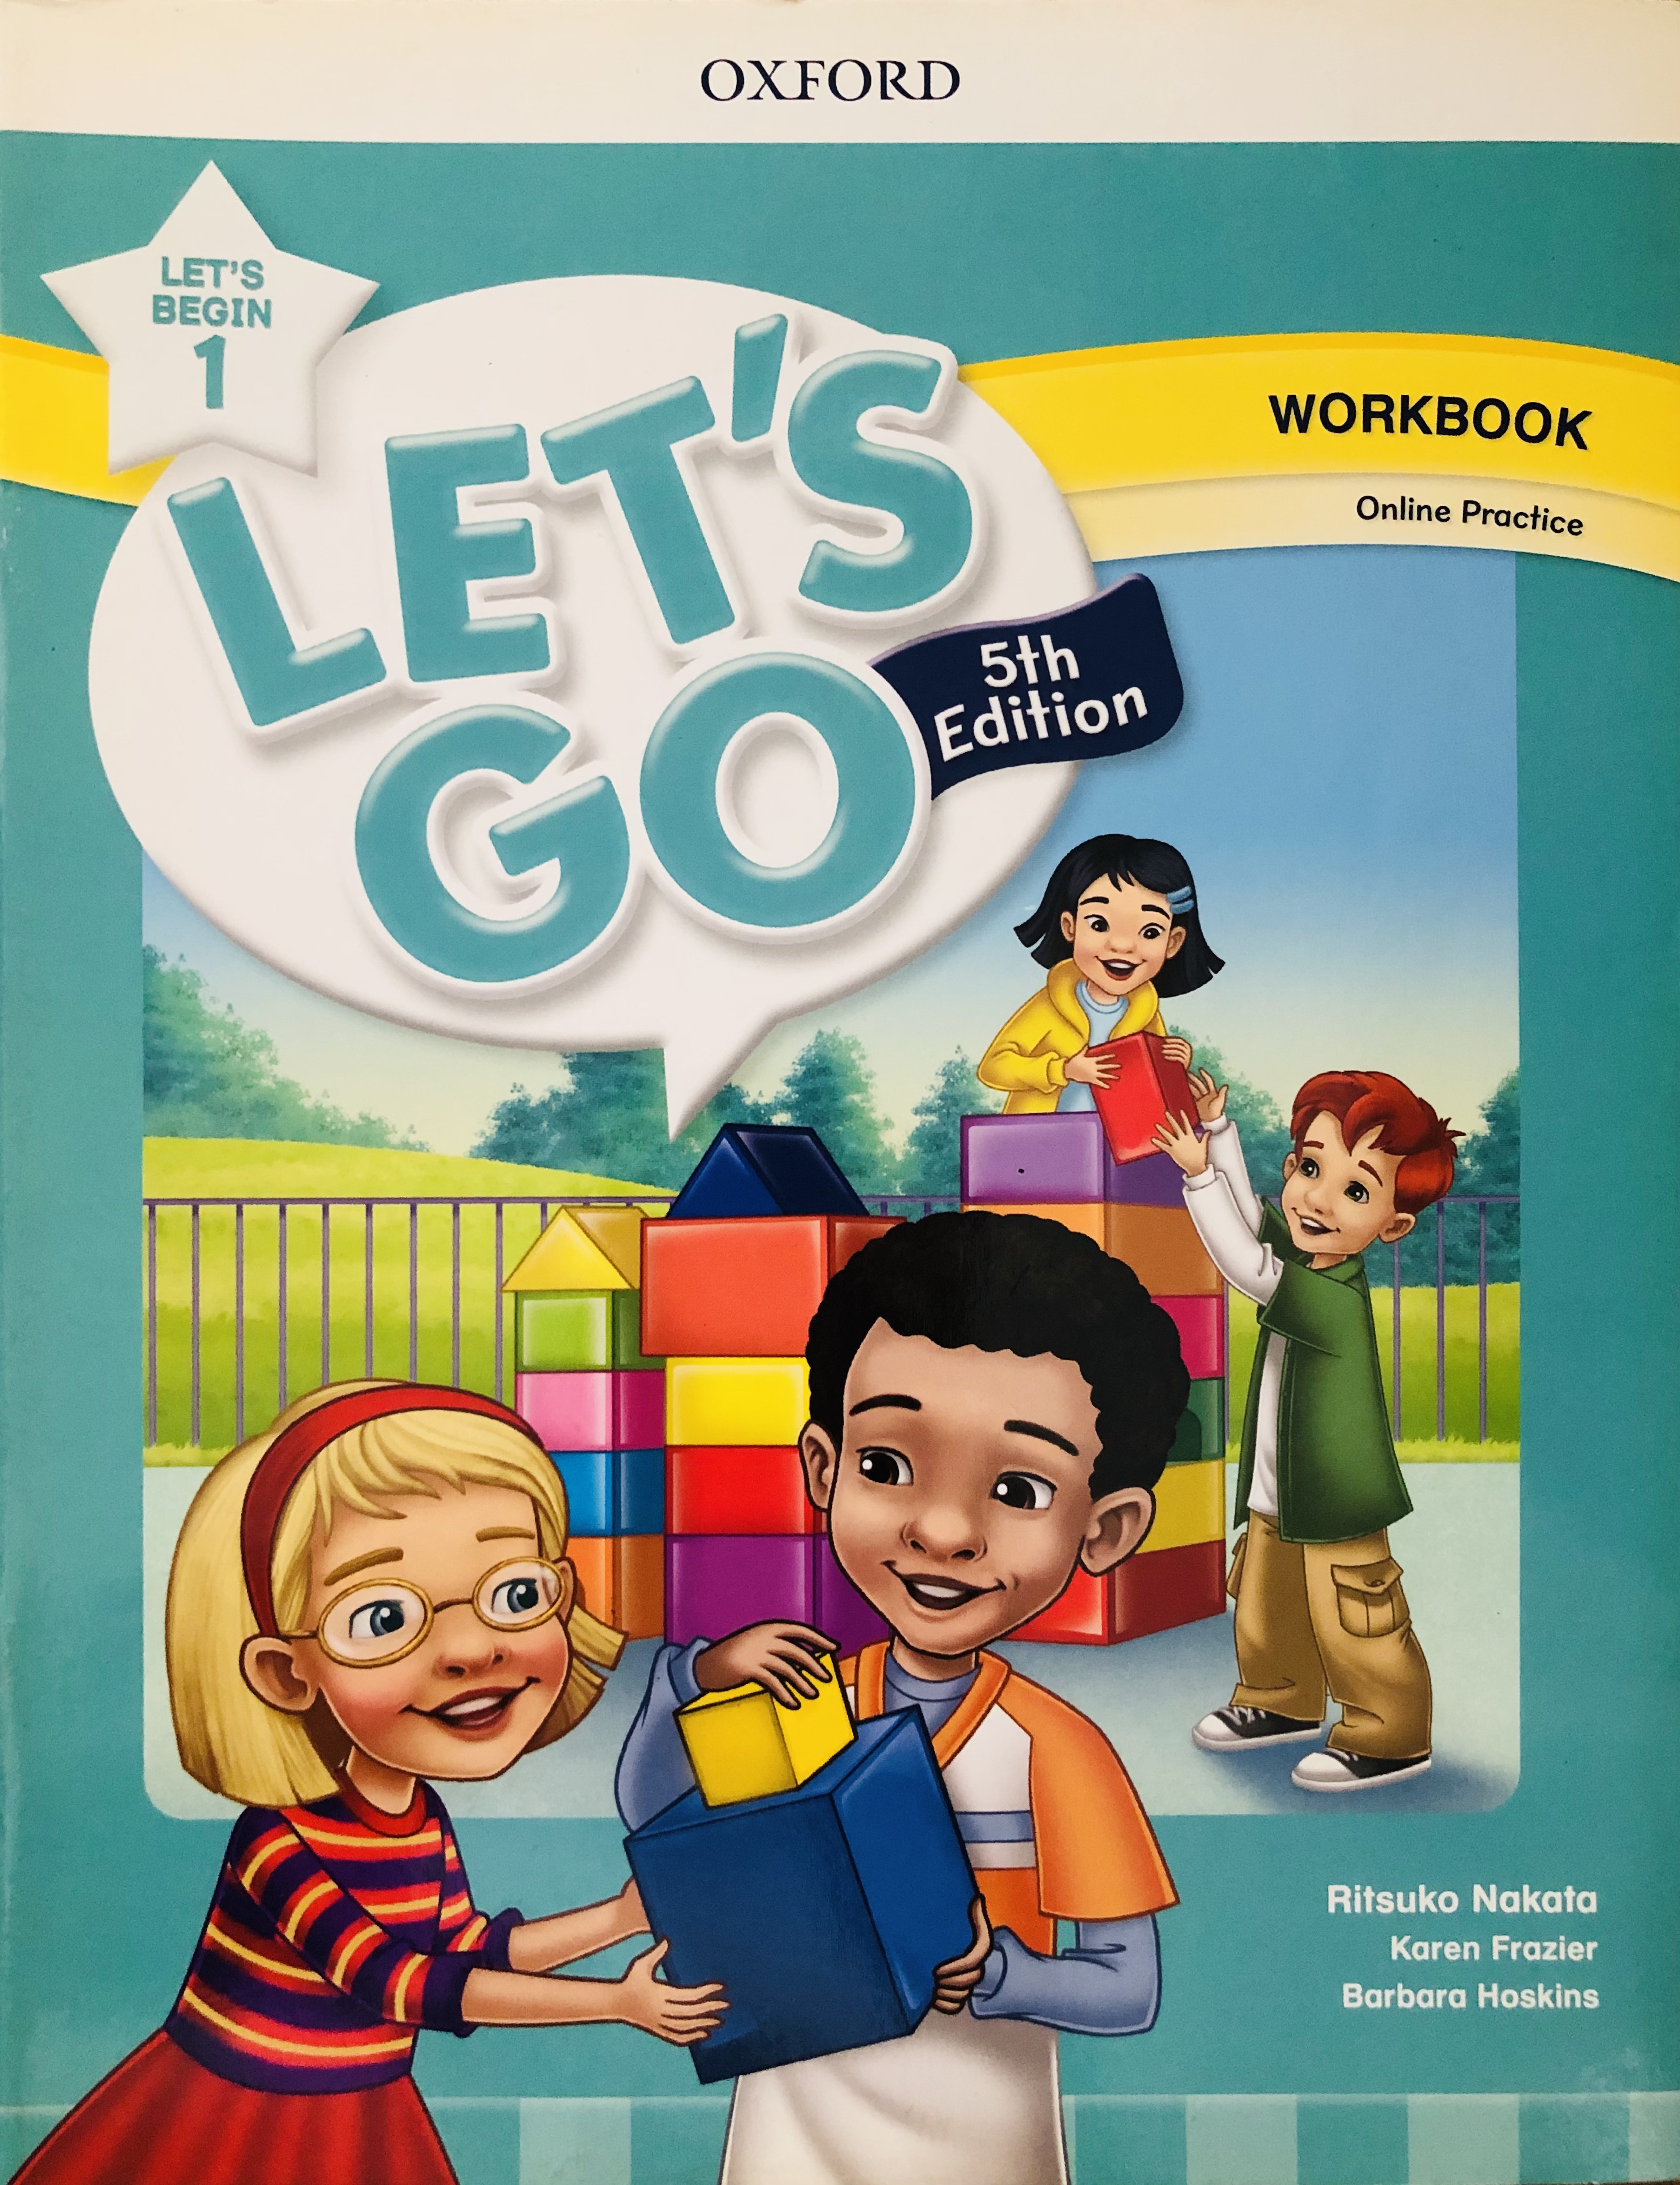 Oxford - Let’s Go 5th Edition (with Online Practice)